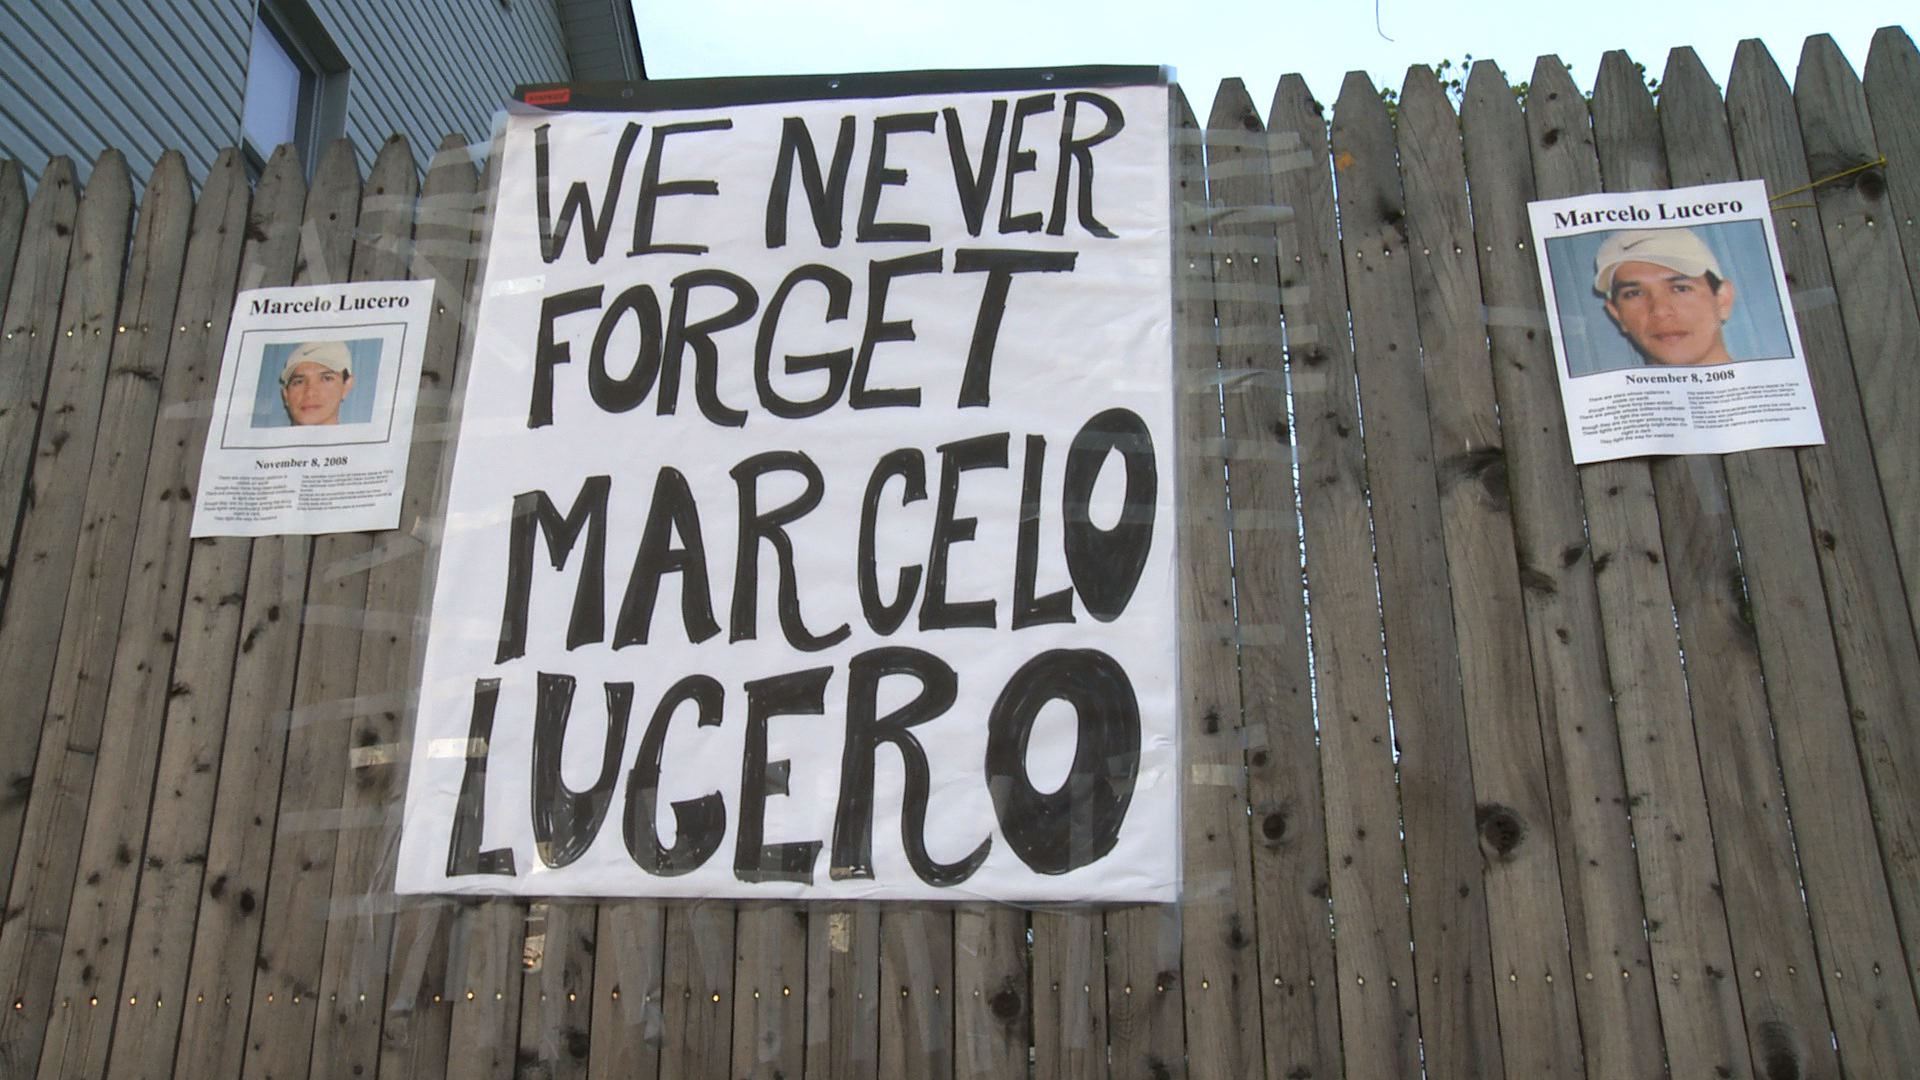 Marcelo Lucero, hate crime, anti-immigrant attack, Patchogue, New York